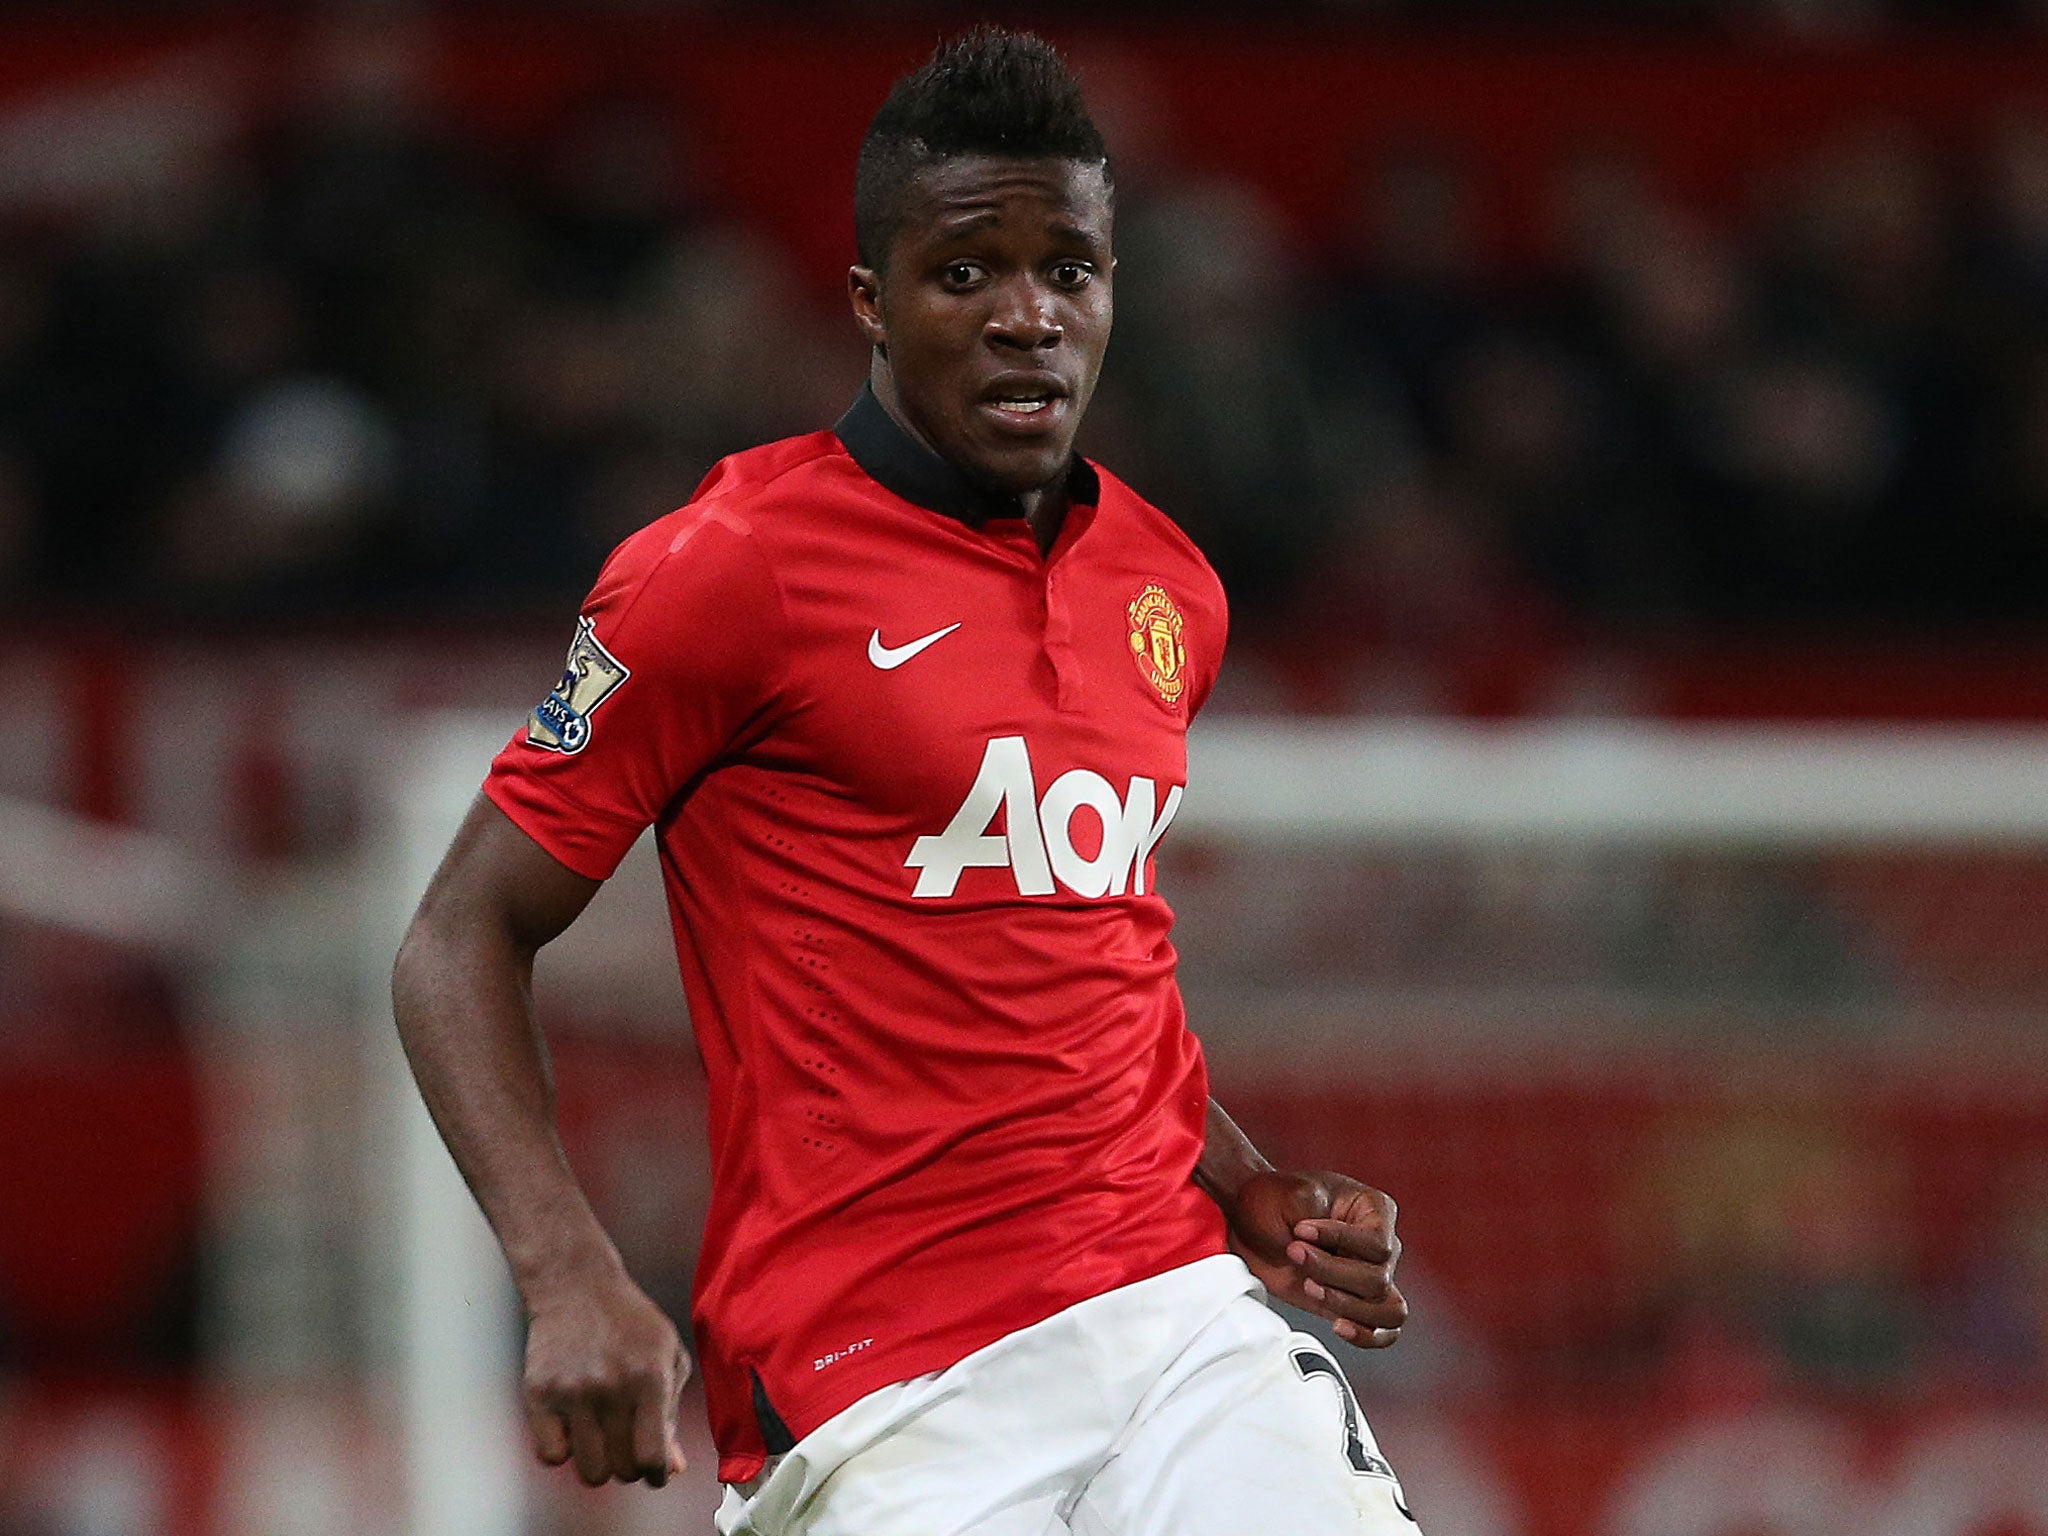 Wilfried Zaha features for Manchester United against Norwich City in the Capital One Cup this week